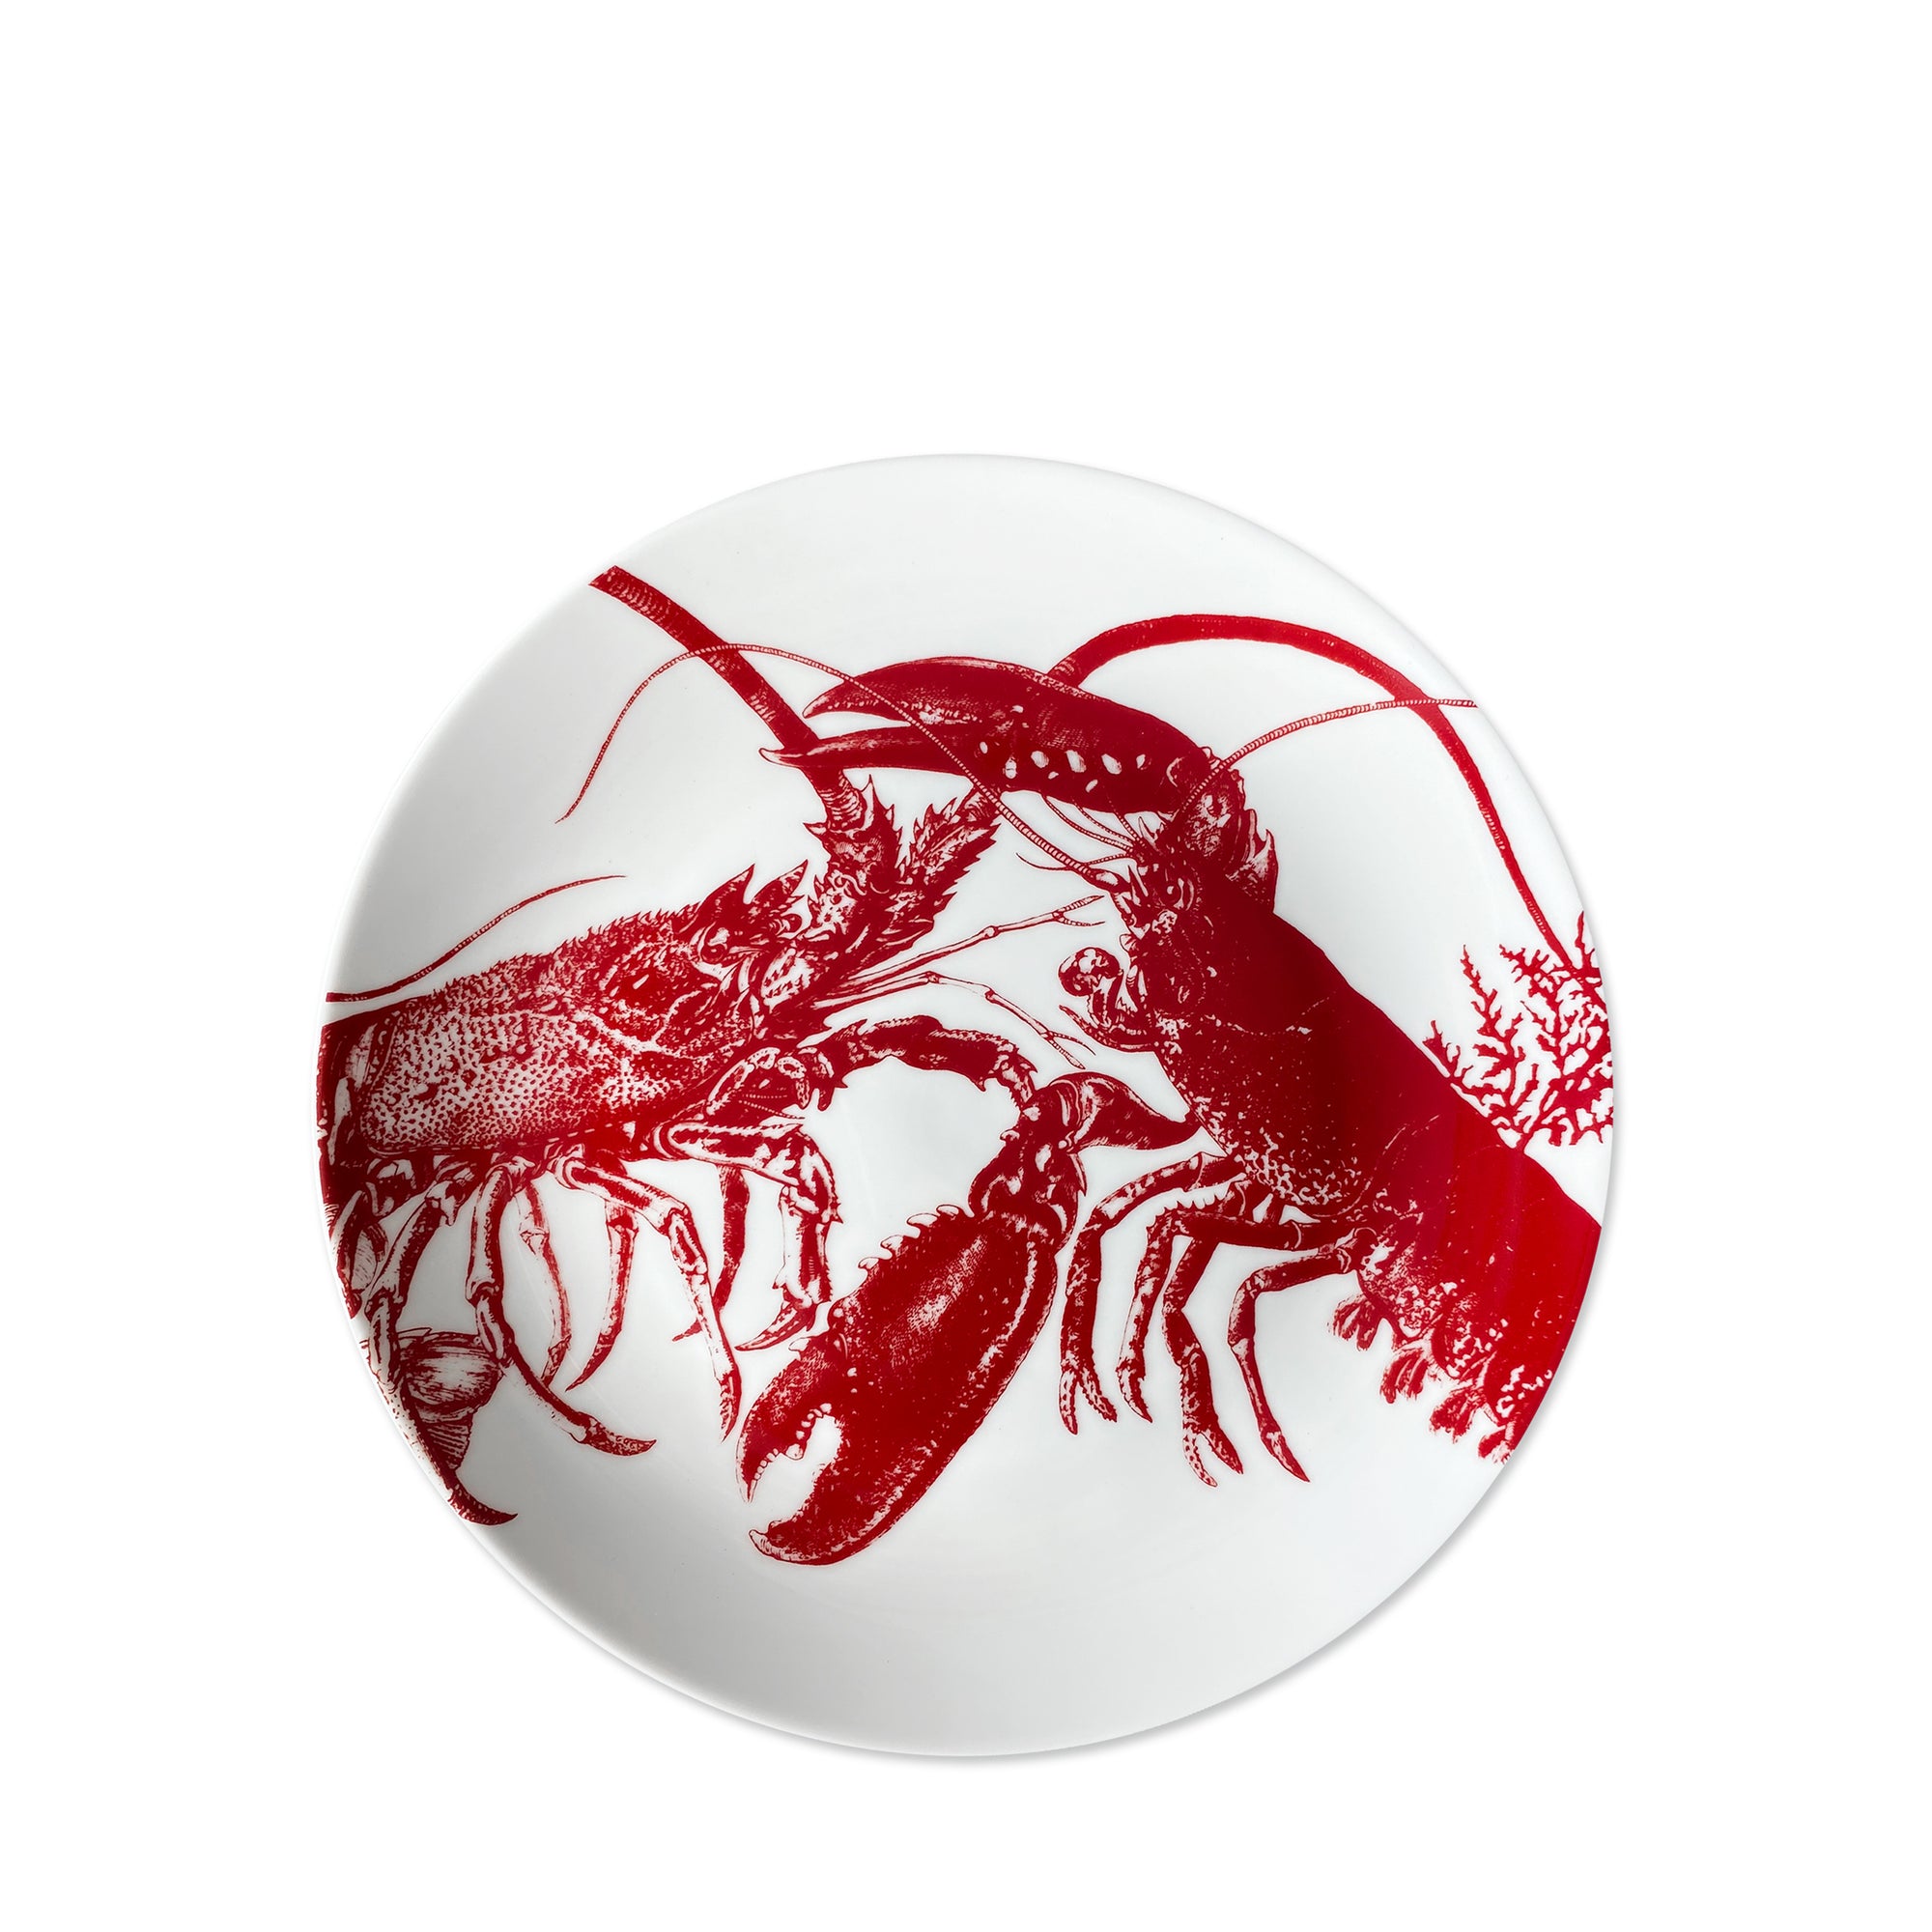 A white Caskata Lobster Coupe Salad Plate featuring a red illustration of two lobsters and some seaweed, crafted from premium porcelain to add a touch of seaside style.